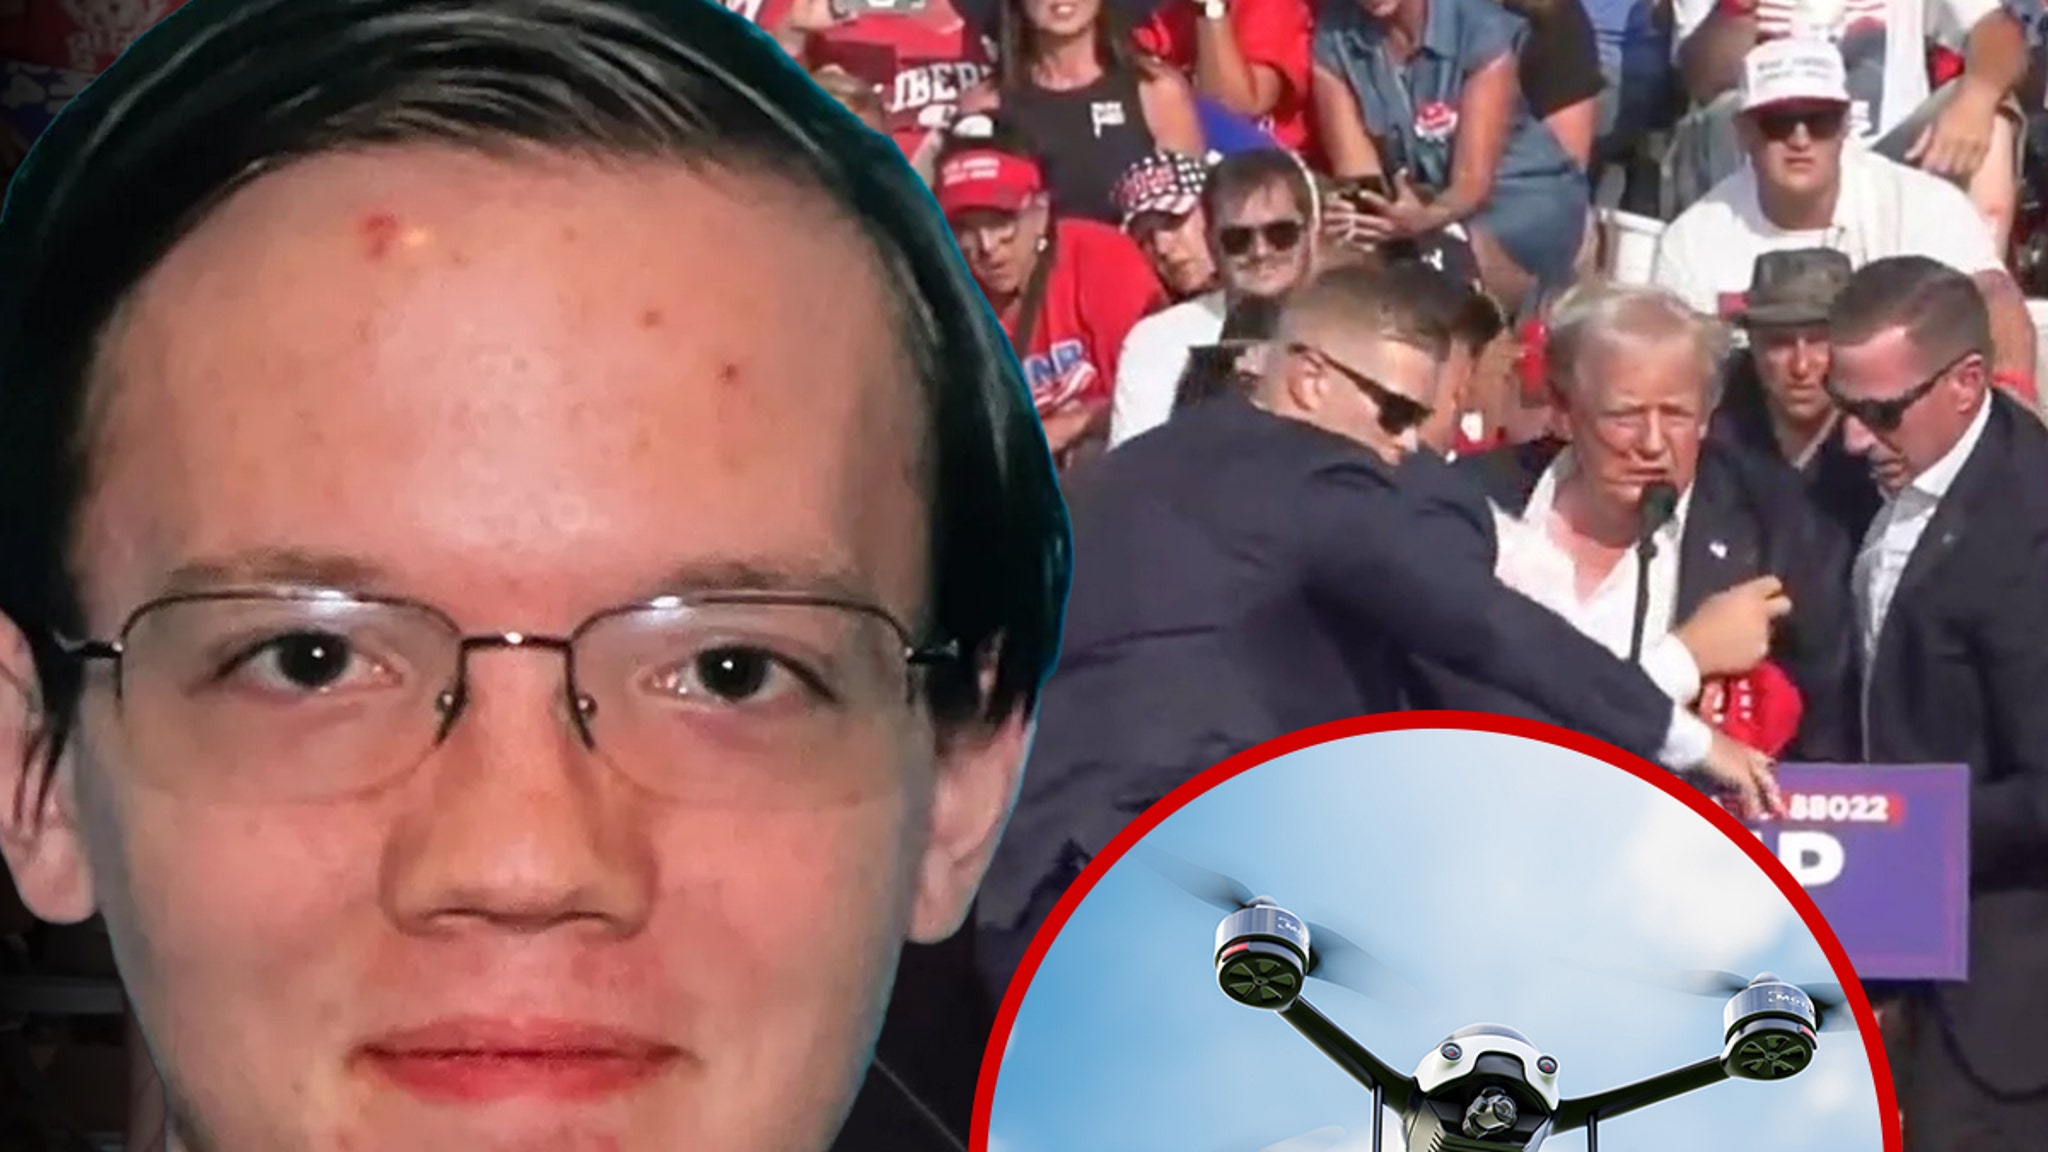 Thomas Matthew Crooks Flew Drone Over Trump Rally Before Assassination Attempt